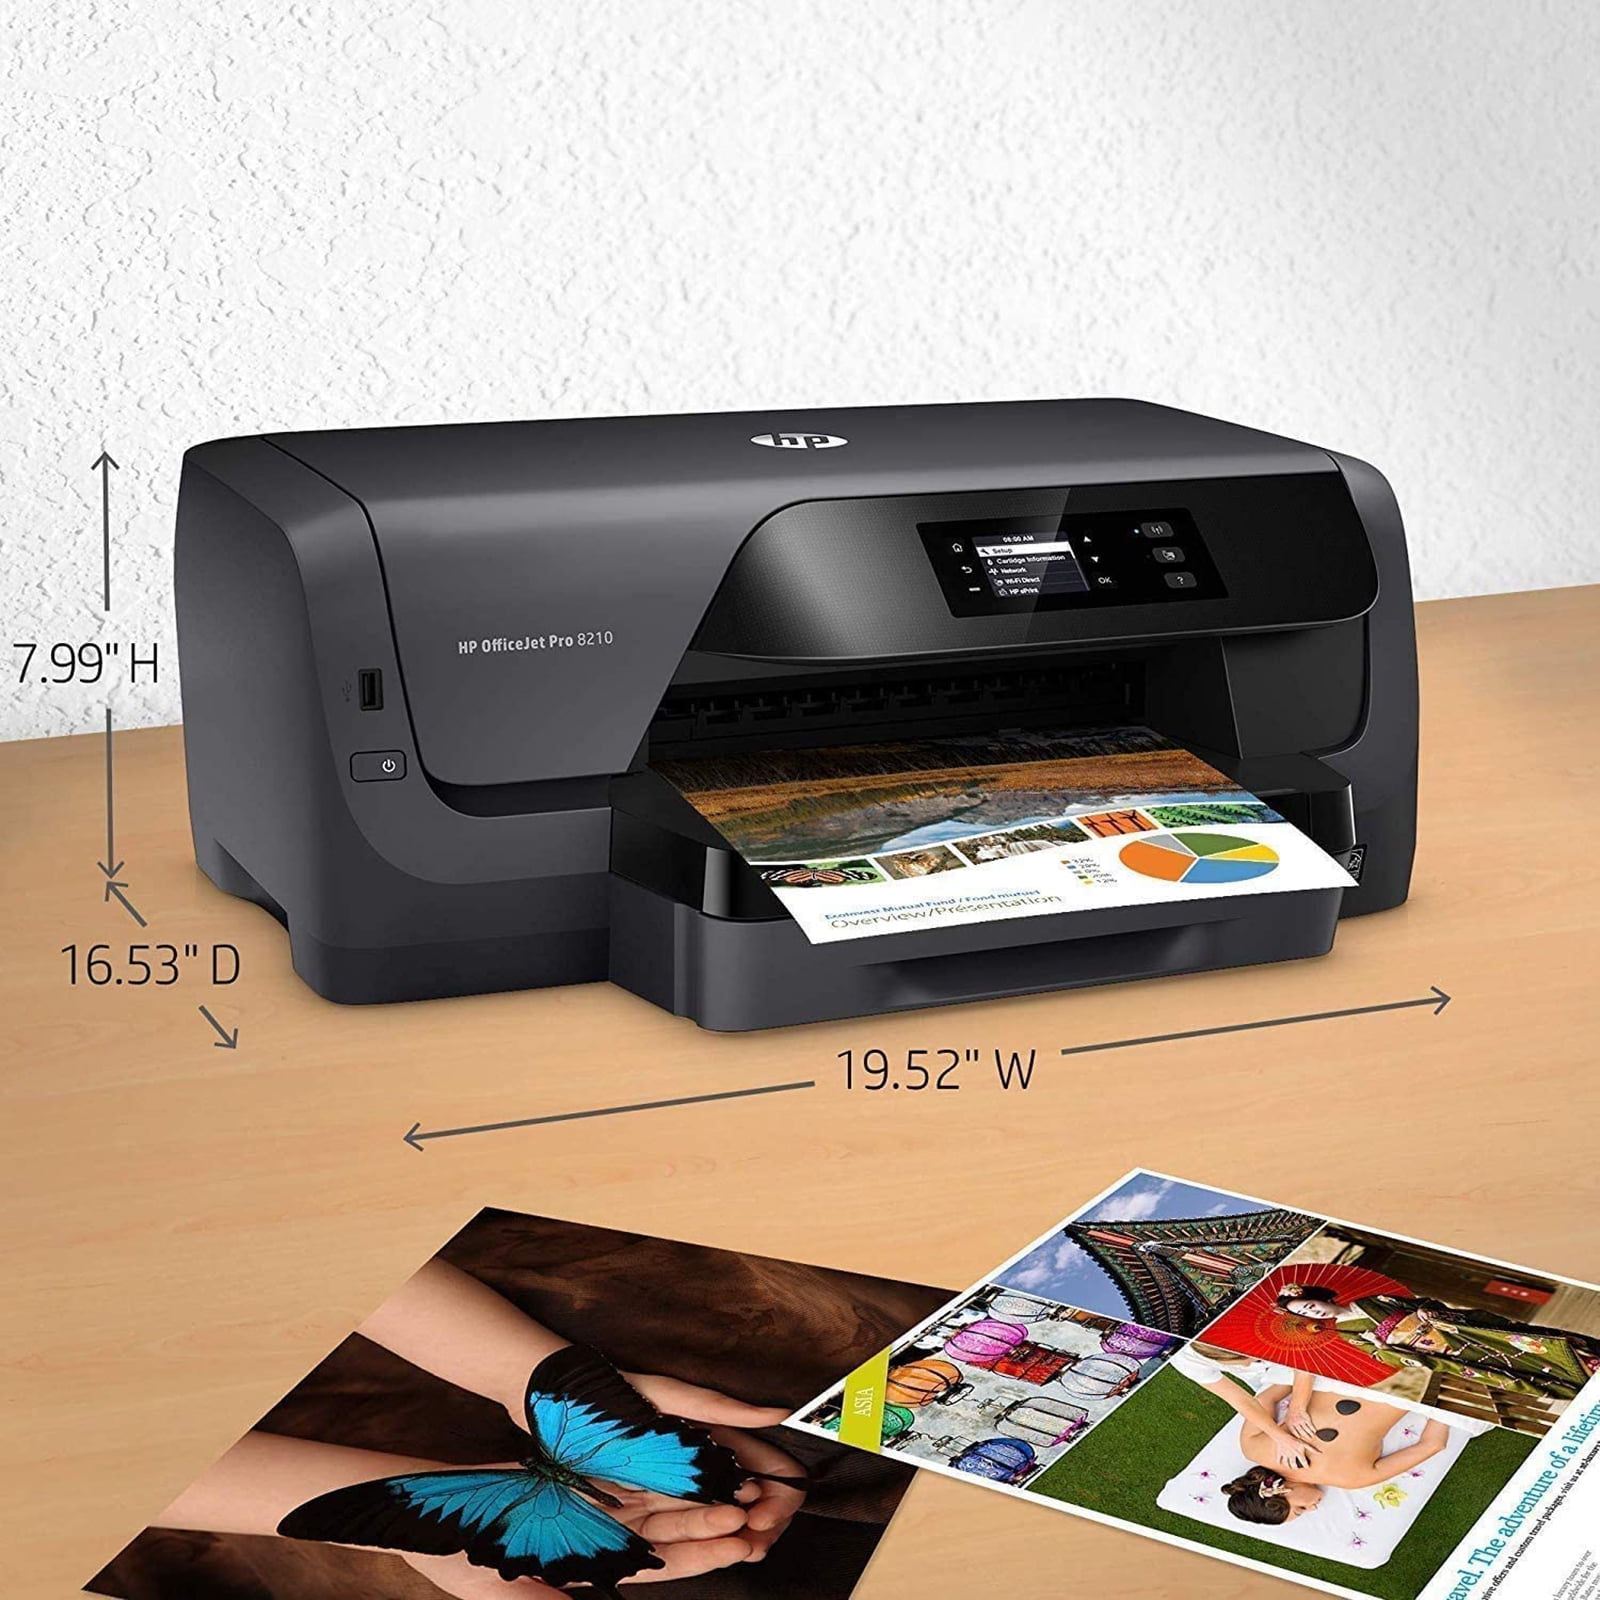 HP OfficeJet Pro 8210 Wireless Color Printer (D9L64A), HP Instant Ink